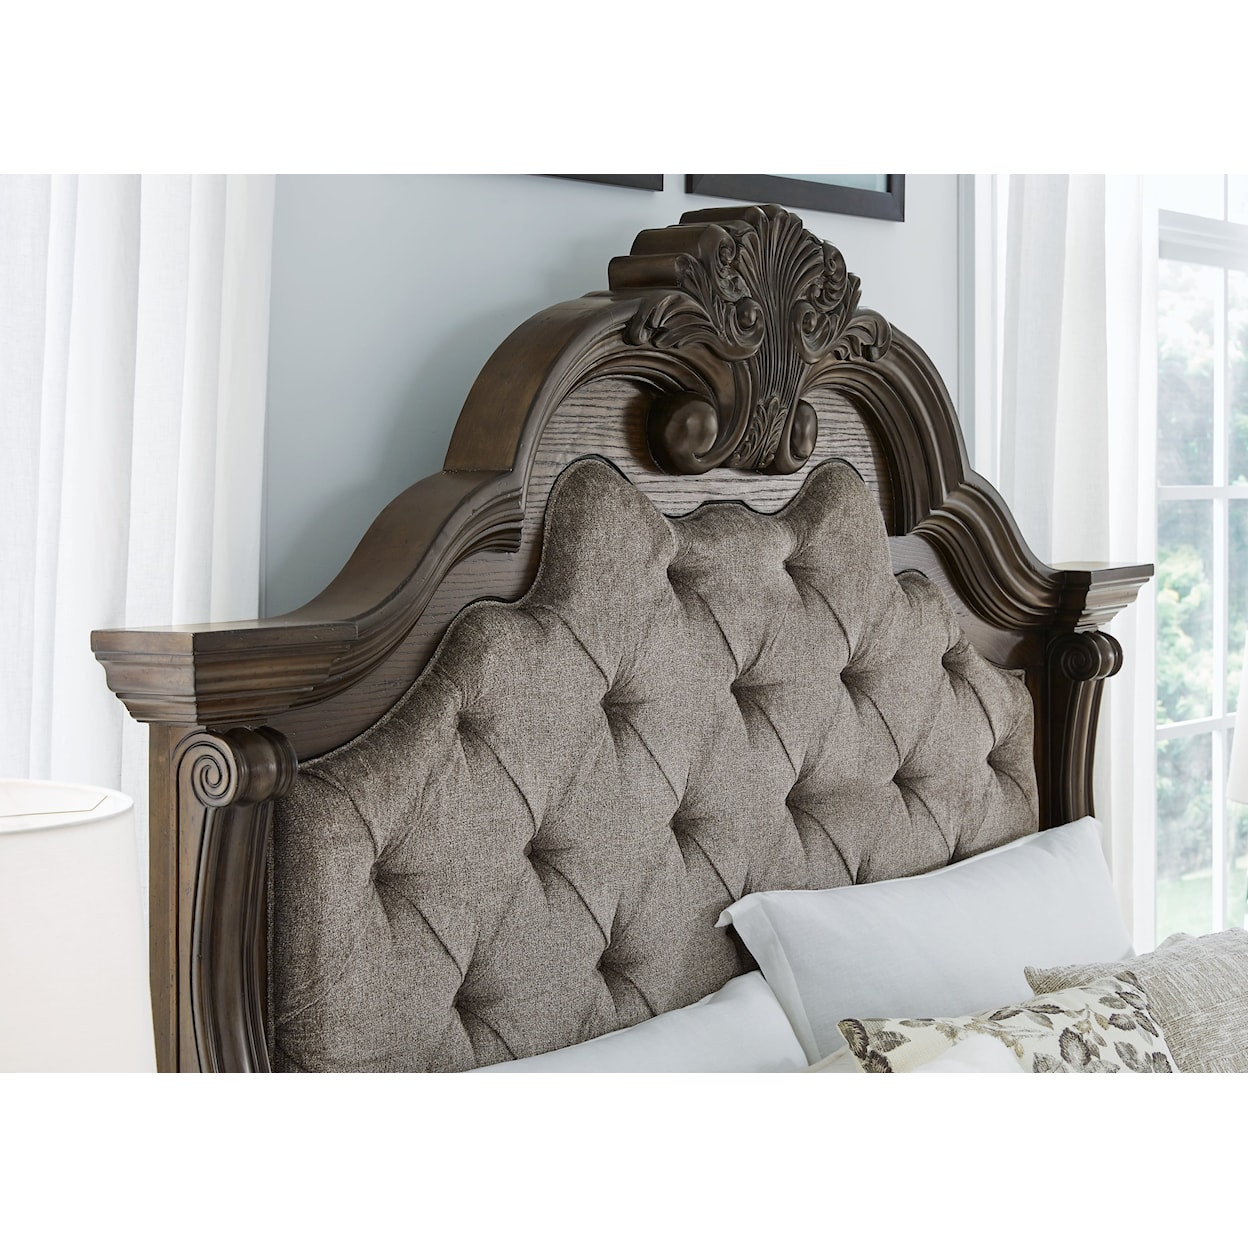 Signature Design by Ashley Furniture Maylee King Upholstered Bed